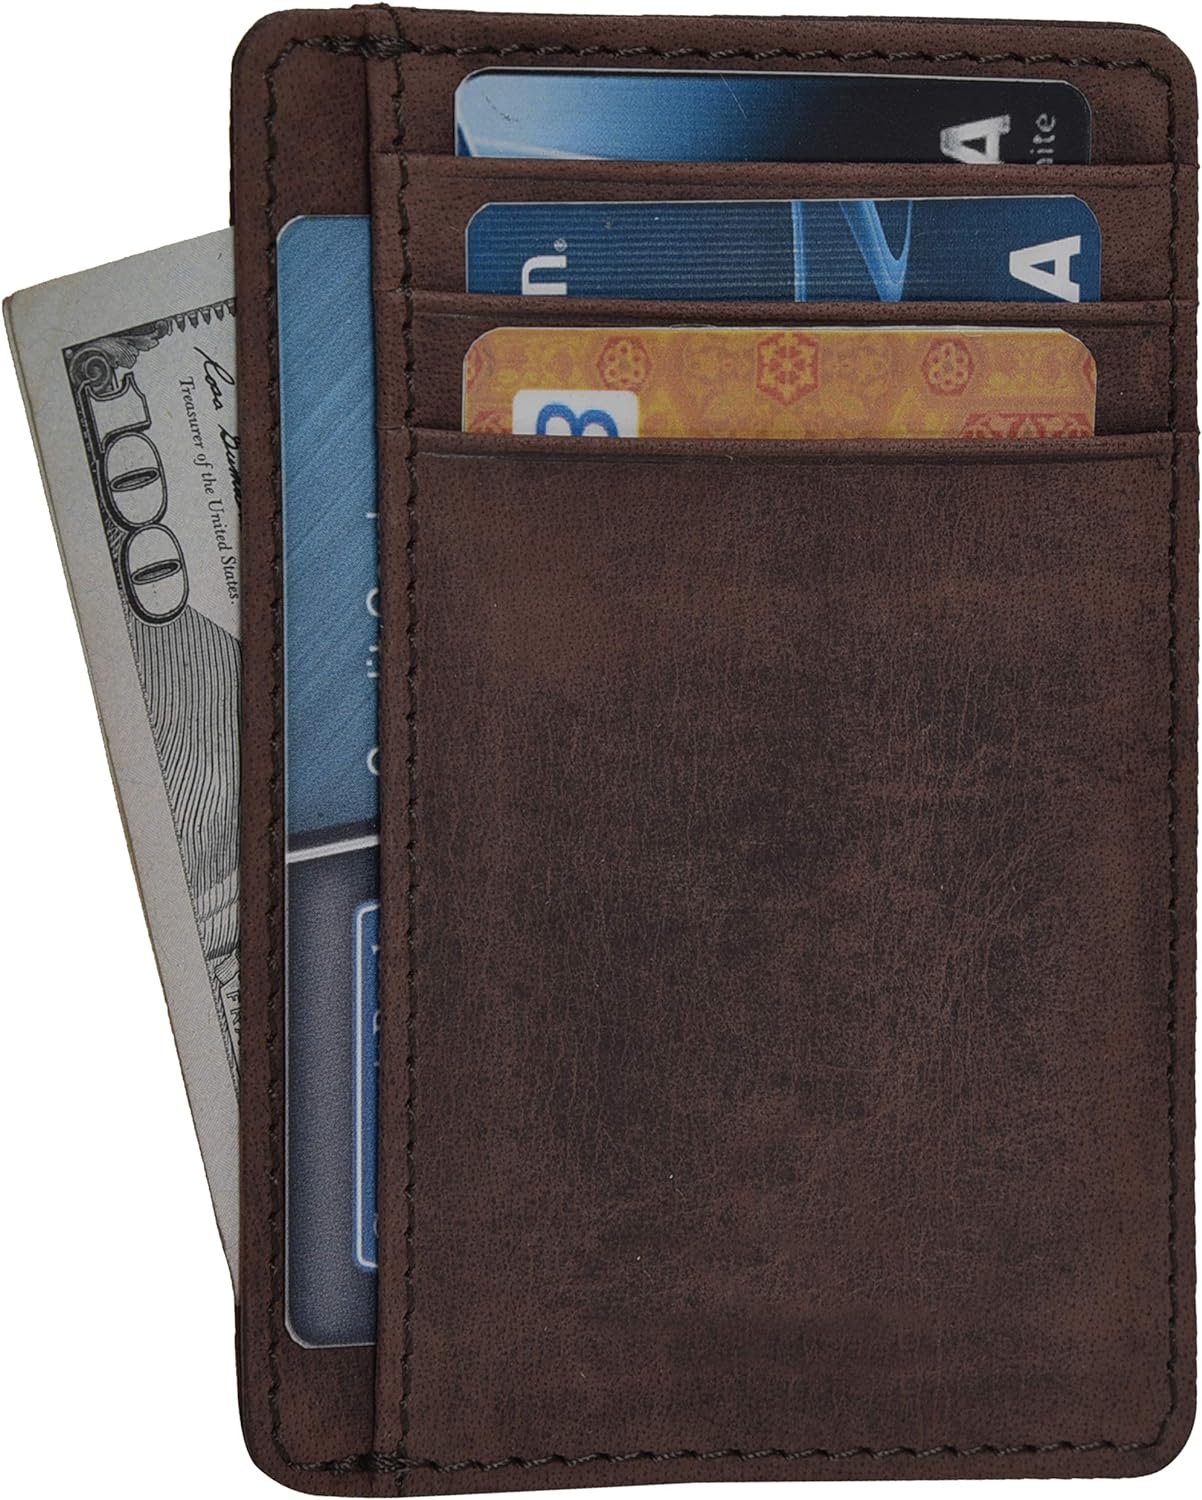 Real Leather Slim Wallet Review